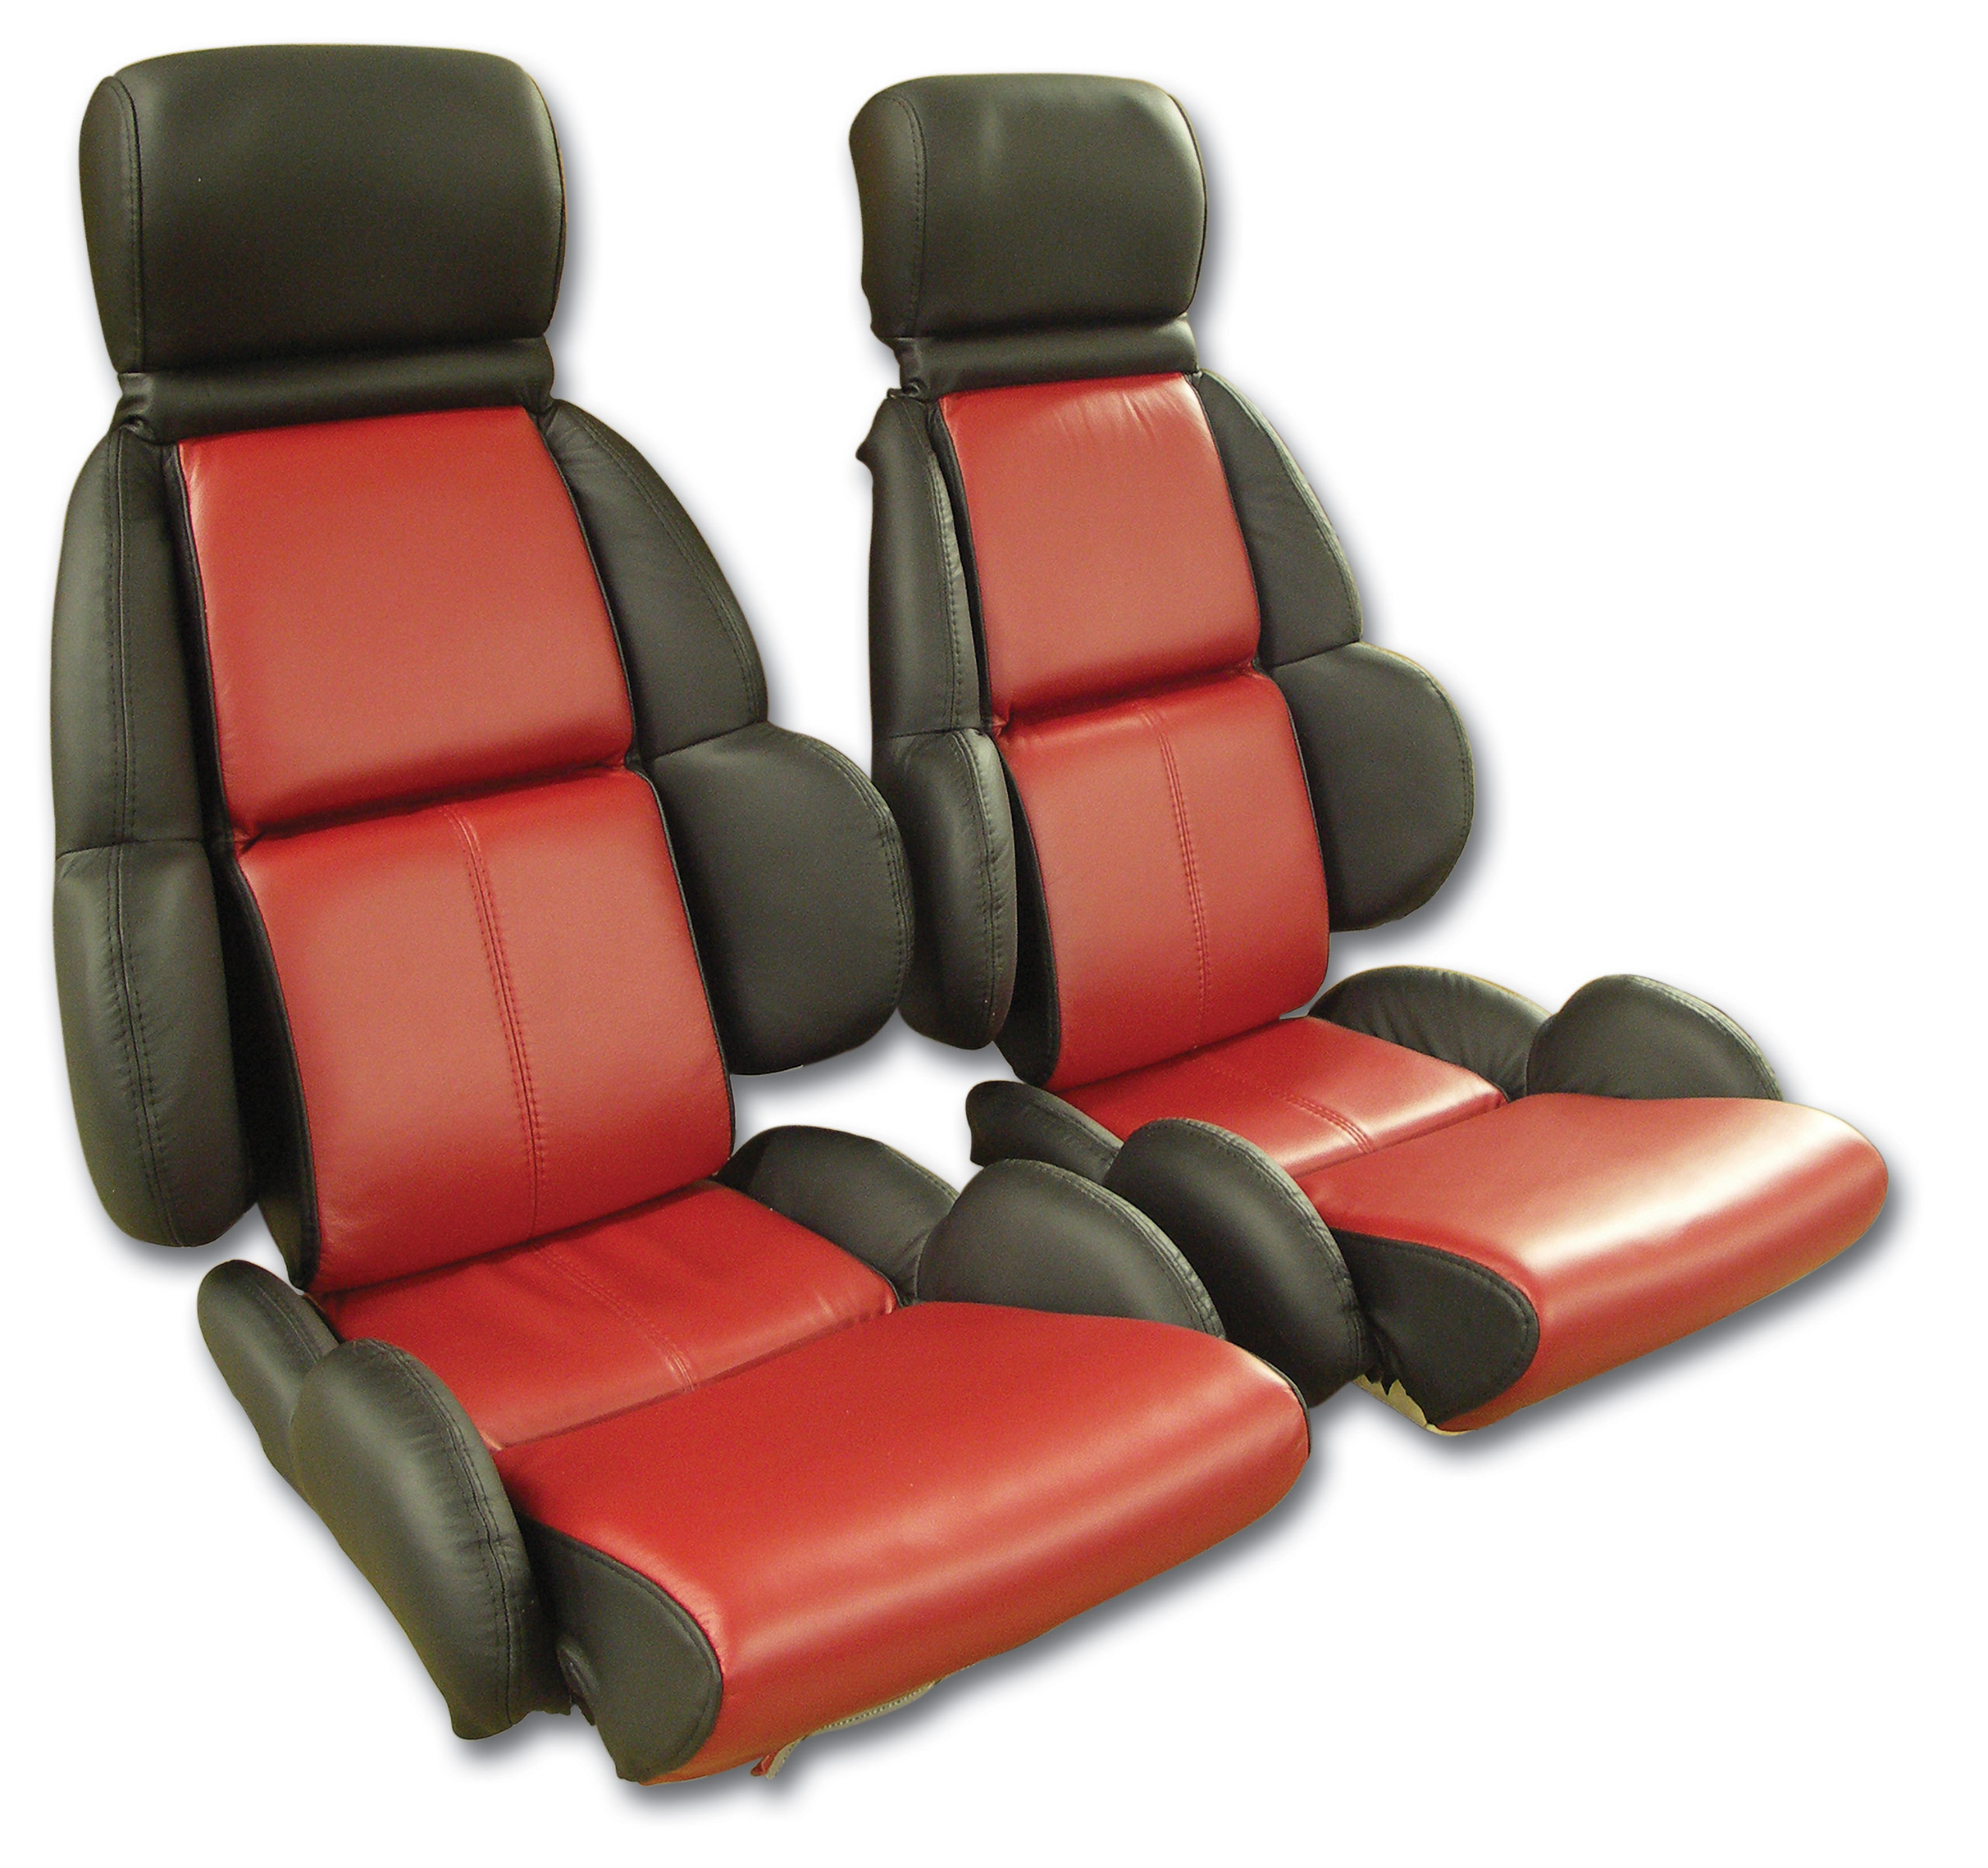 1989-1992 C4 Corvette Mounted 100% Leather Standard Seat Covers - Black /Red 2-Tone